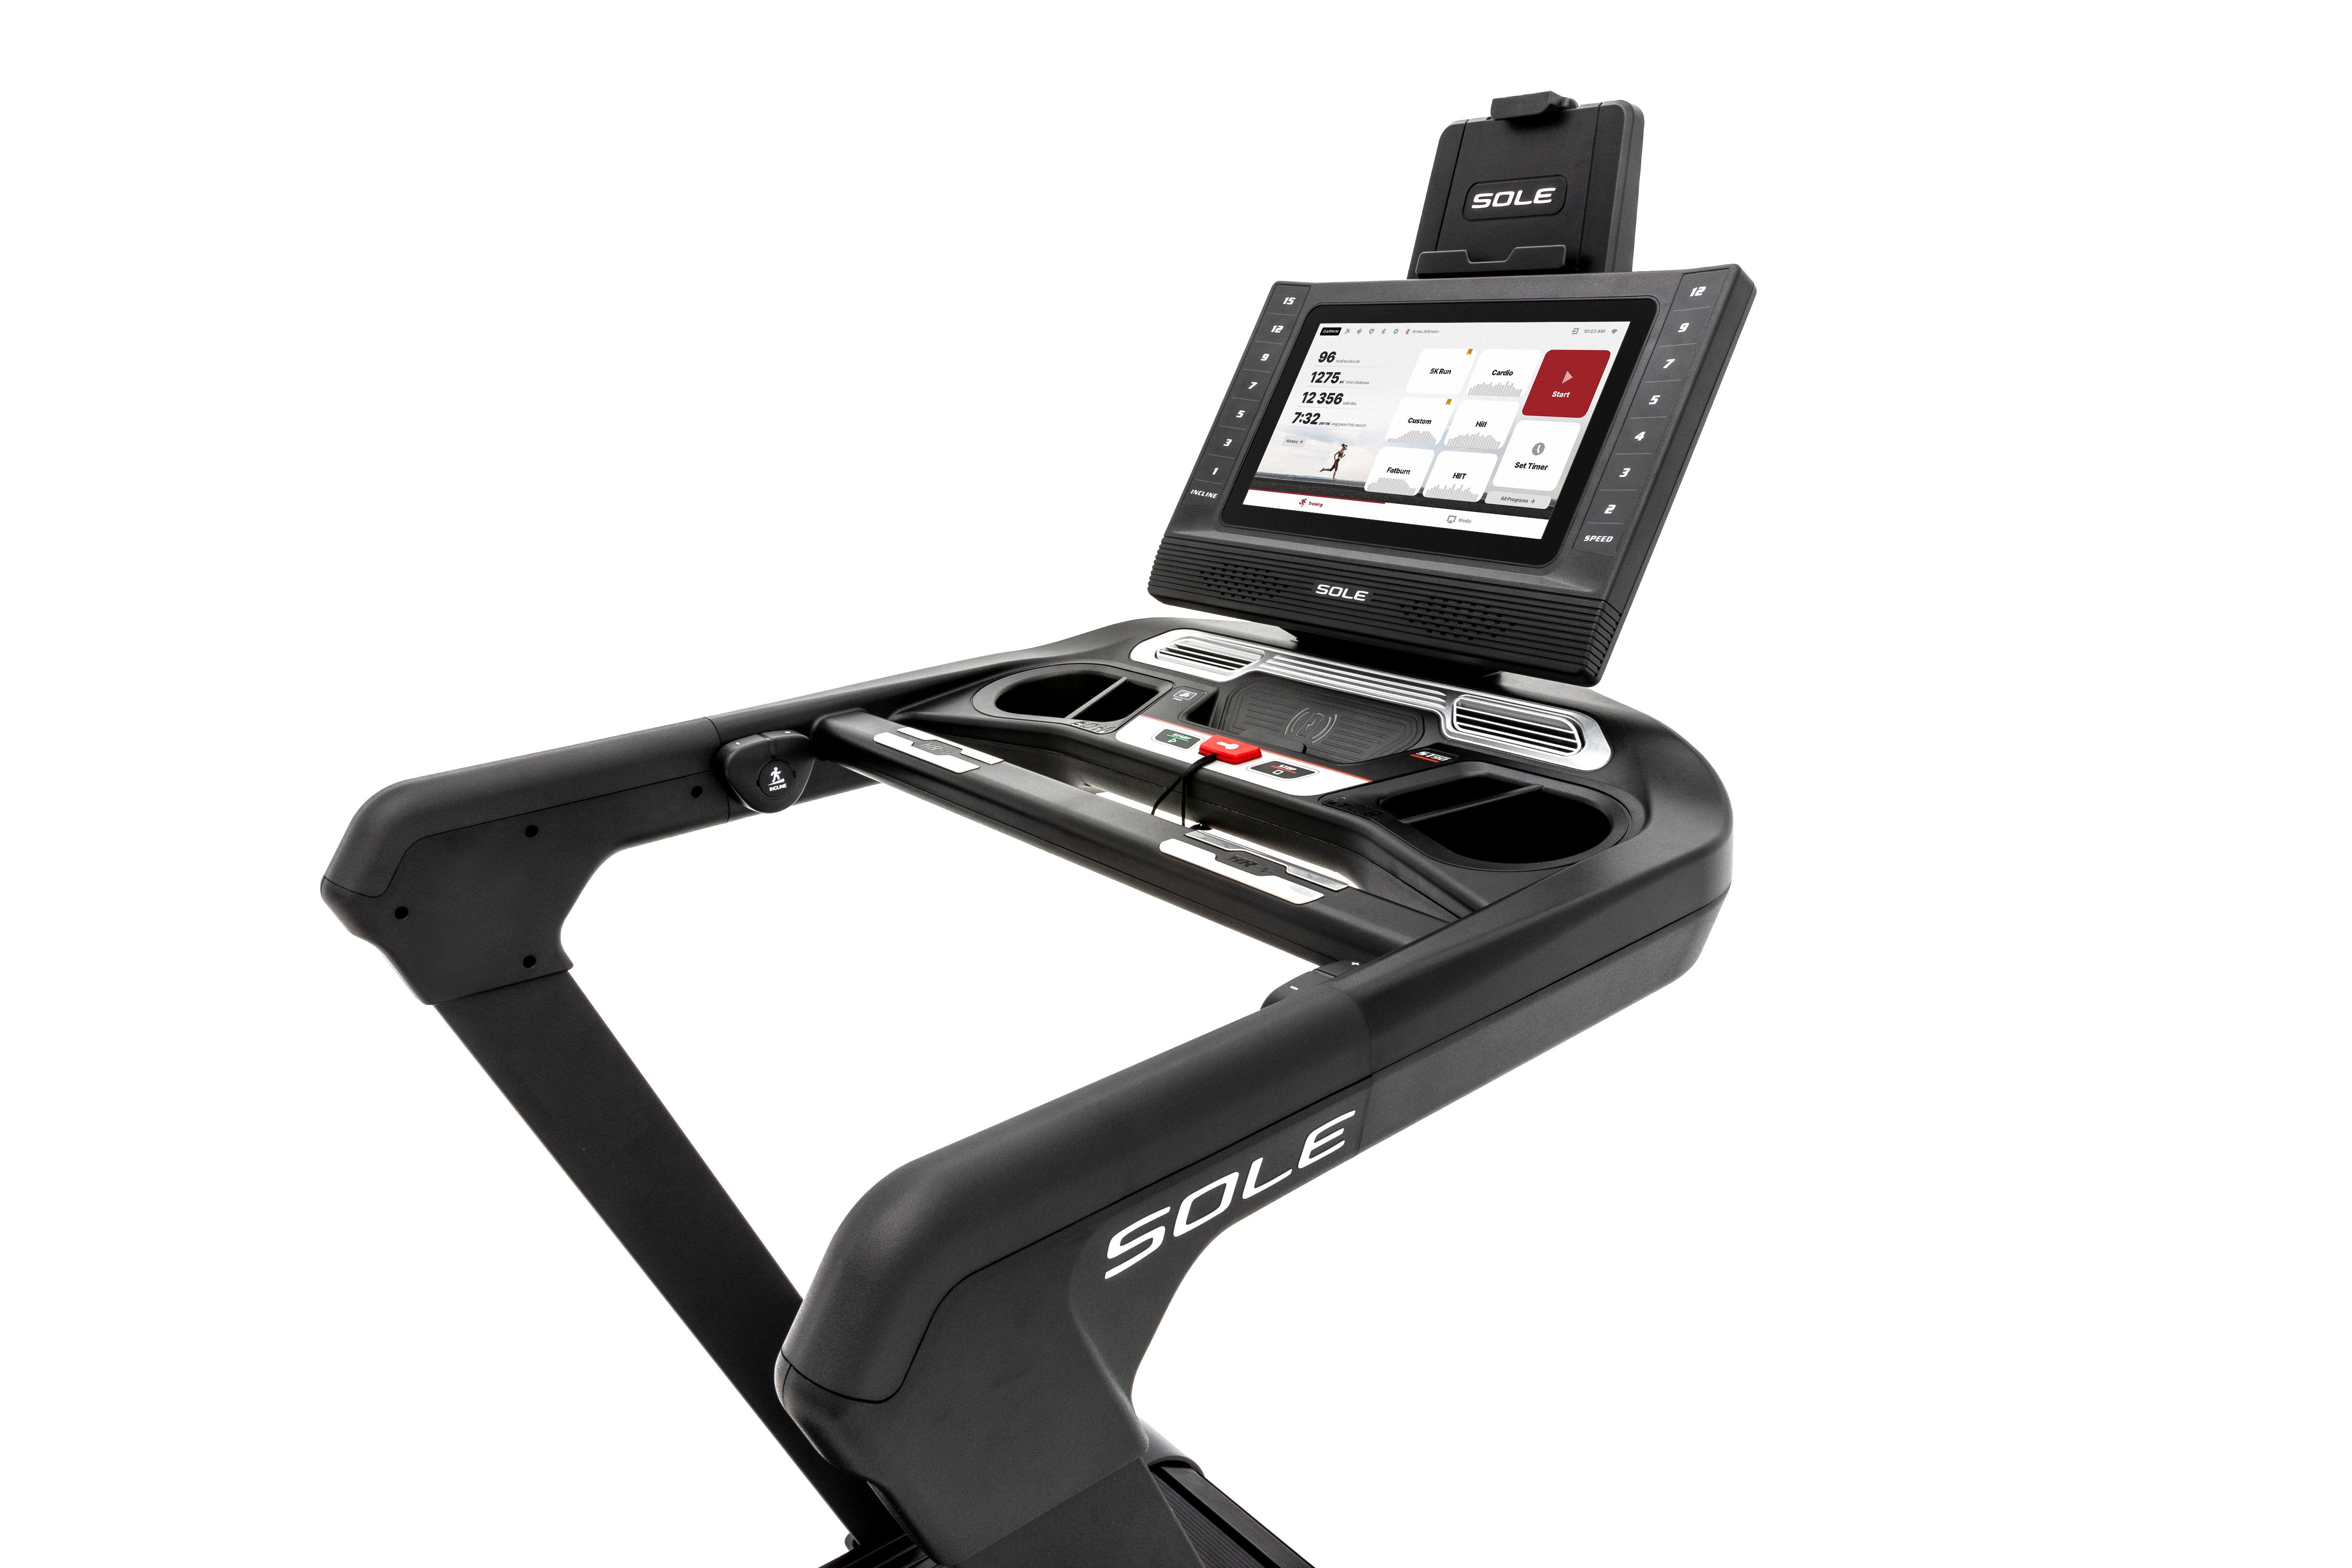 Close-up side view of the Sole ST90 treadmill's handlebar, control panel with cup holders, and digital display featuring workout metrics, all set against a white background.